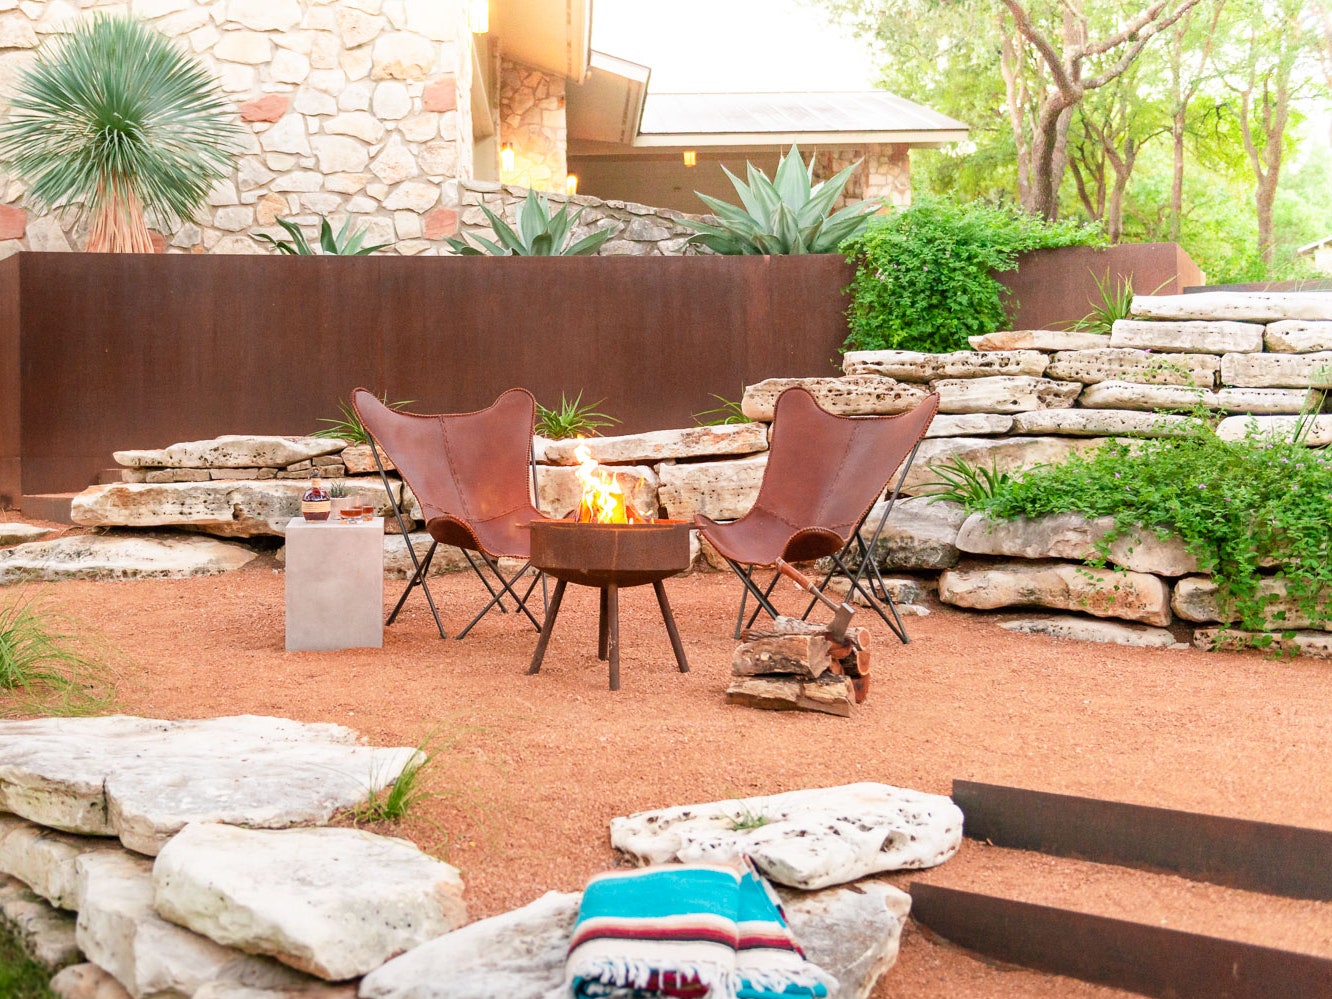 Outdoor fire pits upgrade a backyard always.